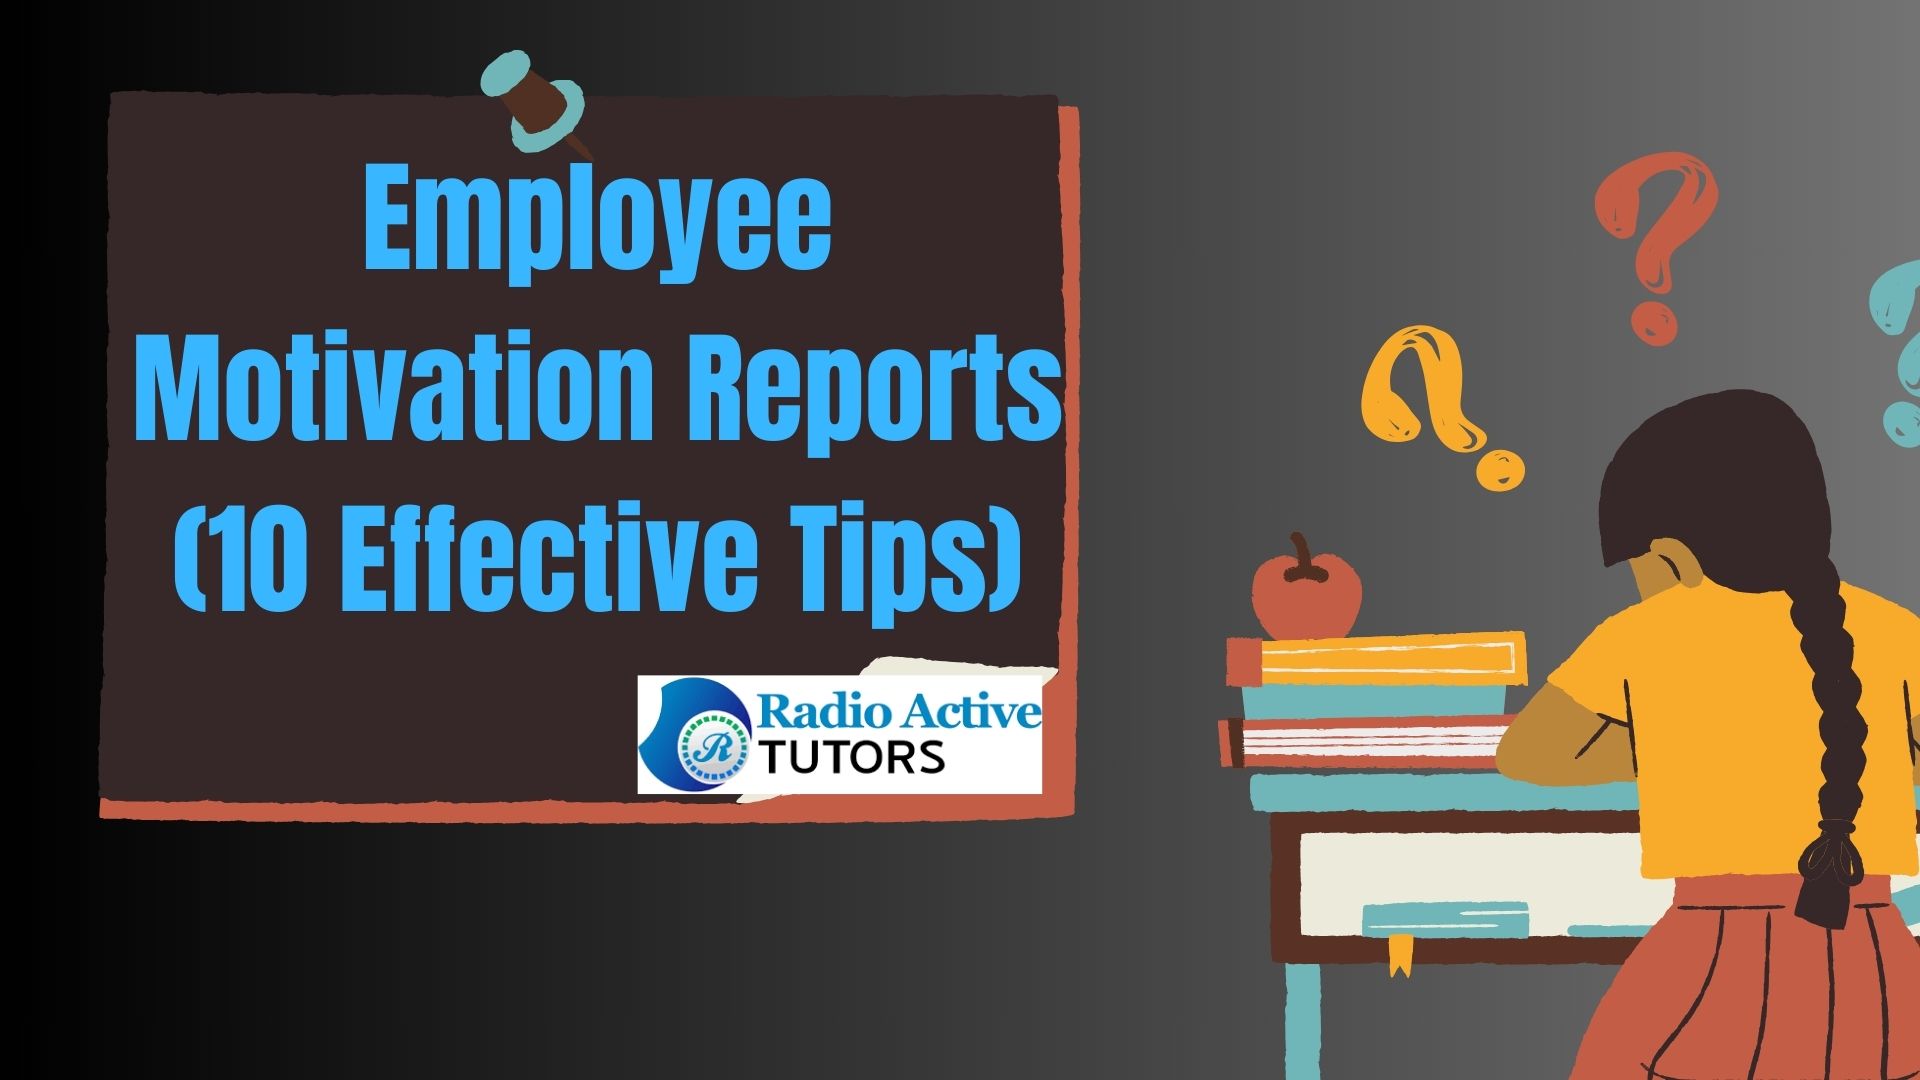 Employee Motivation Reports (10 Effective Tips)